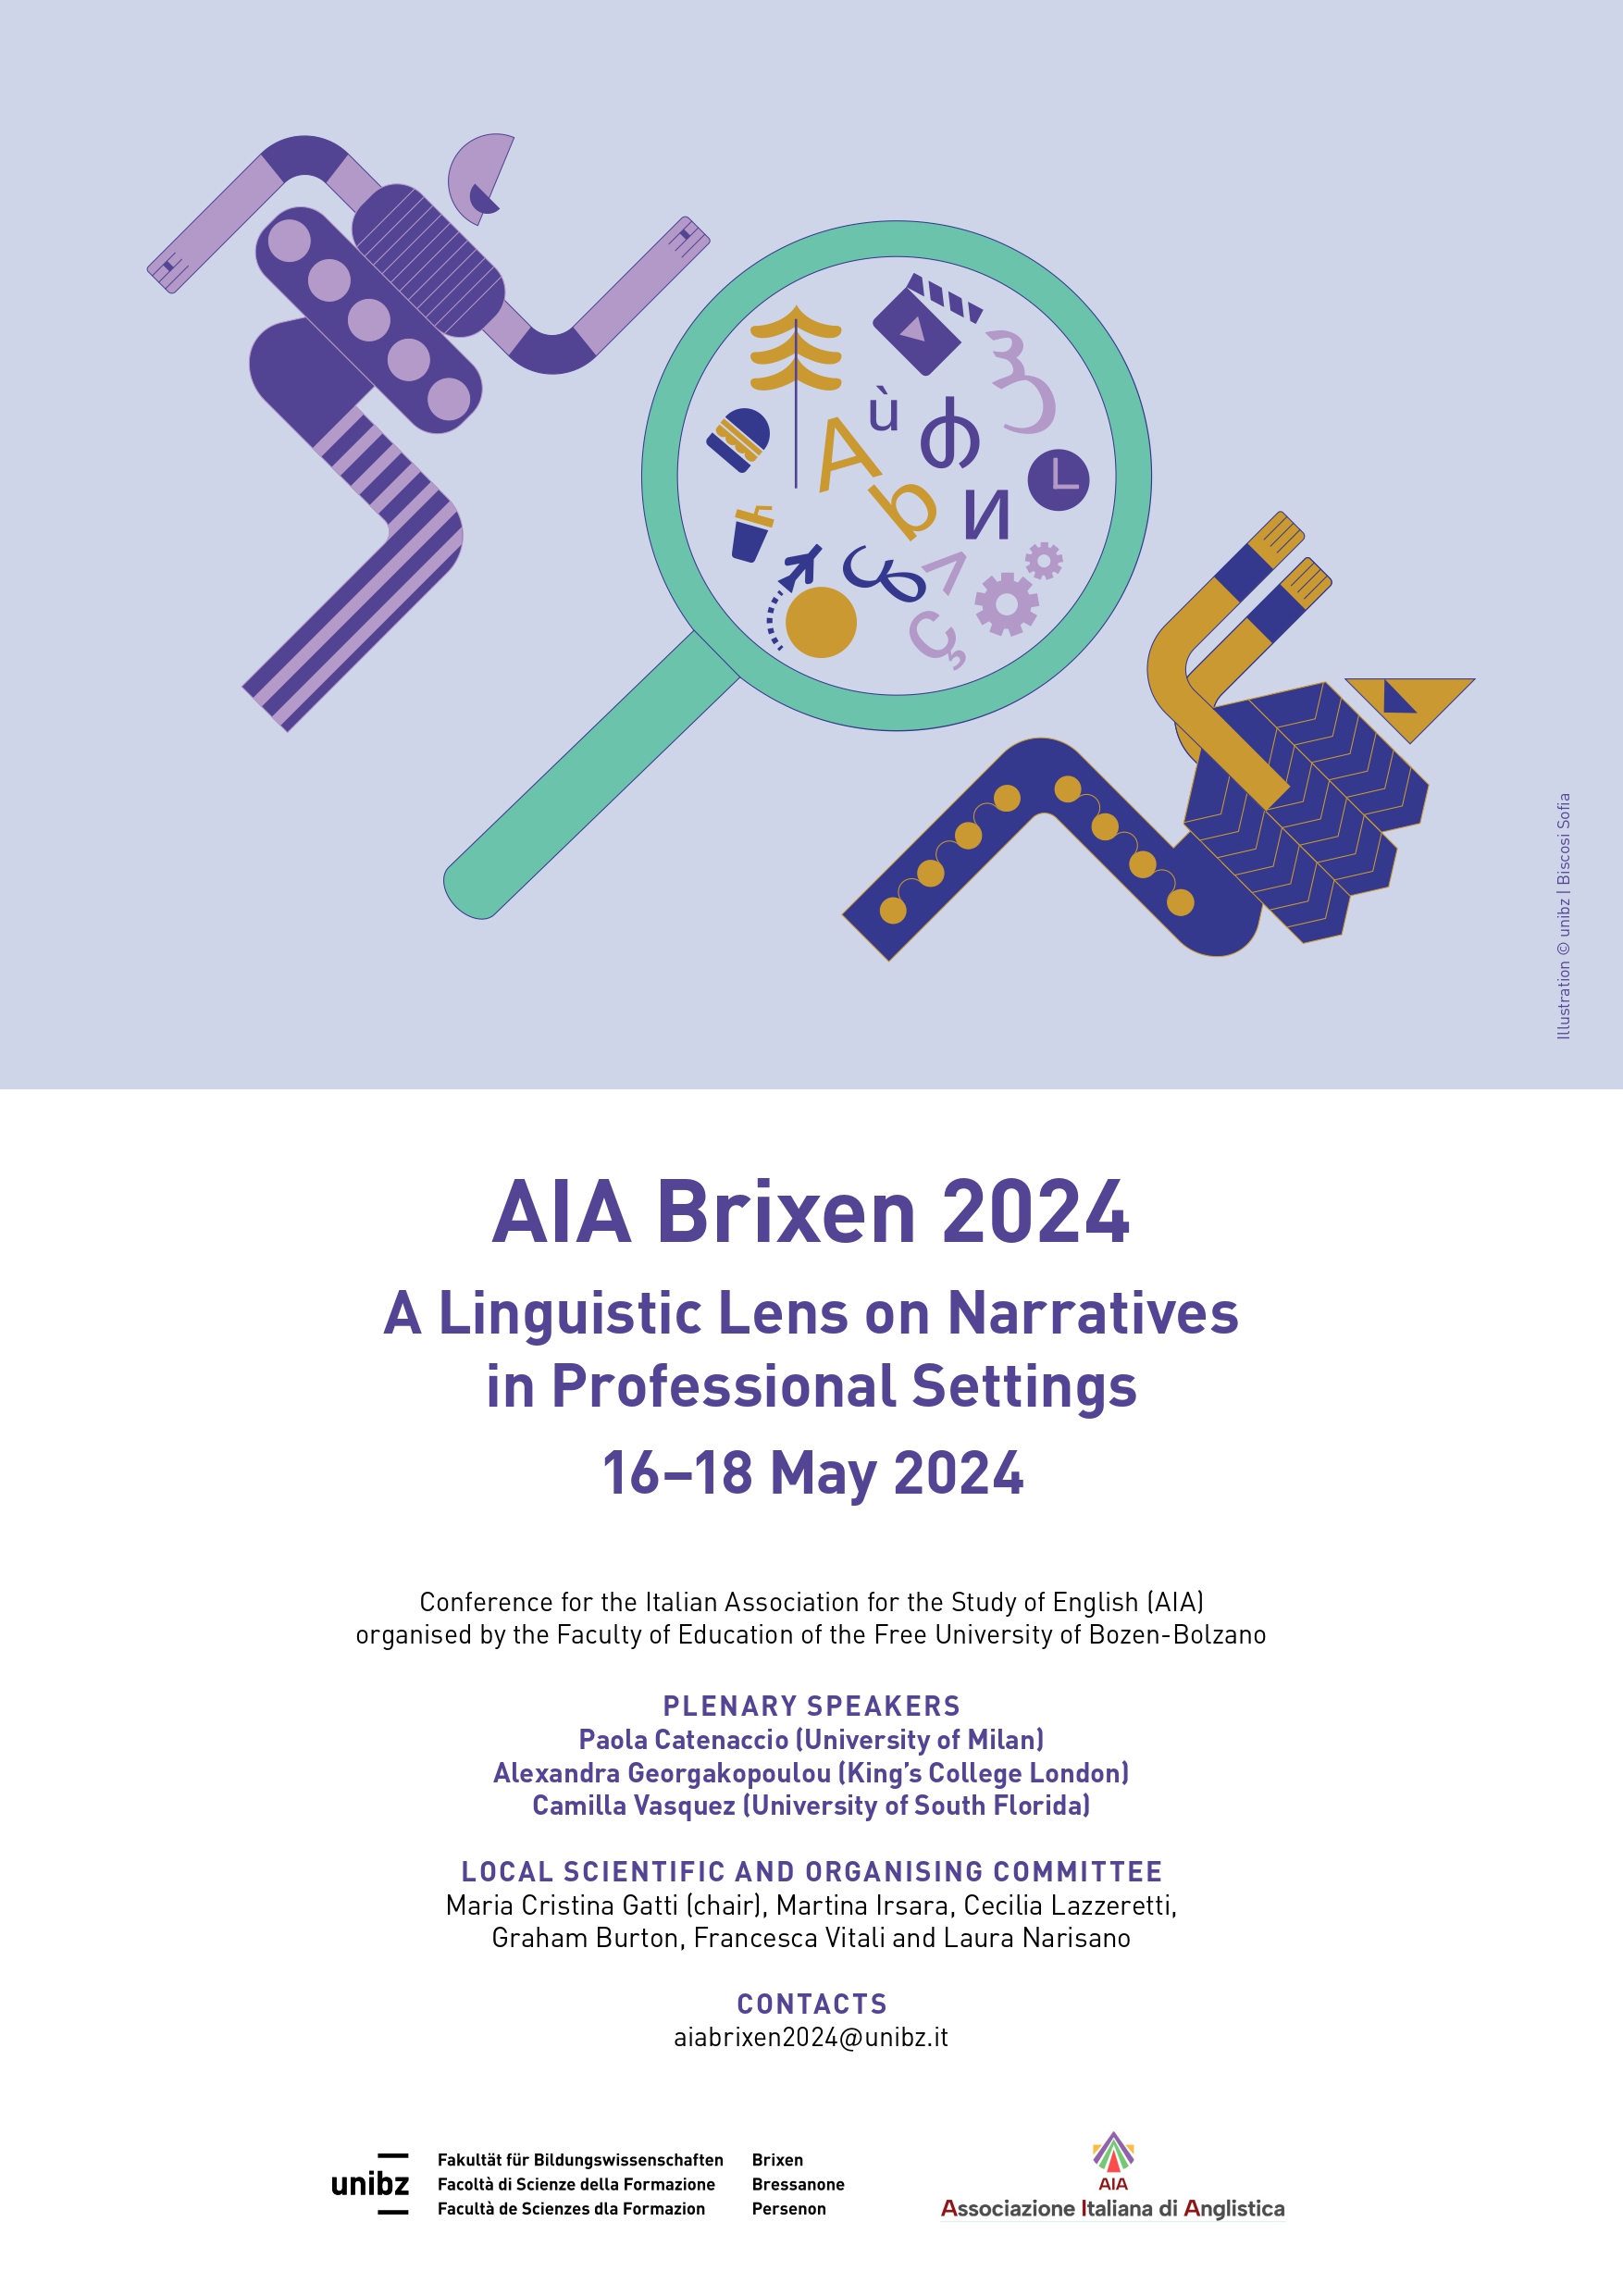 AlA Brixen 2024 A Linguistic Lens on Narratives in Professional Settings 16-18 May 2024​